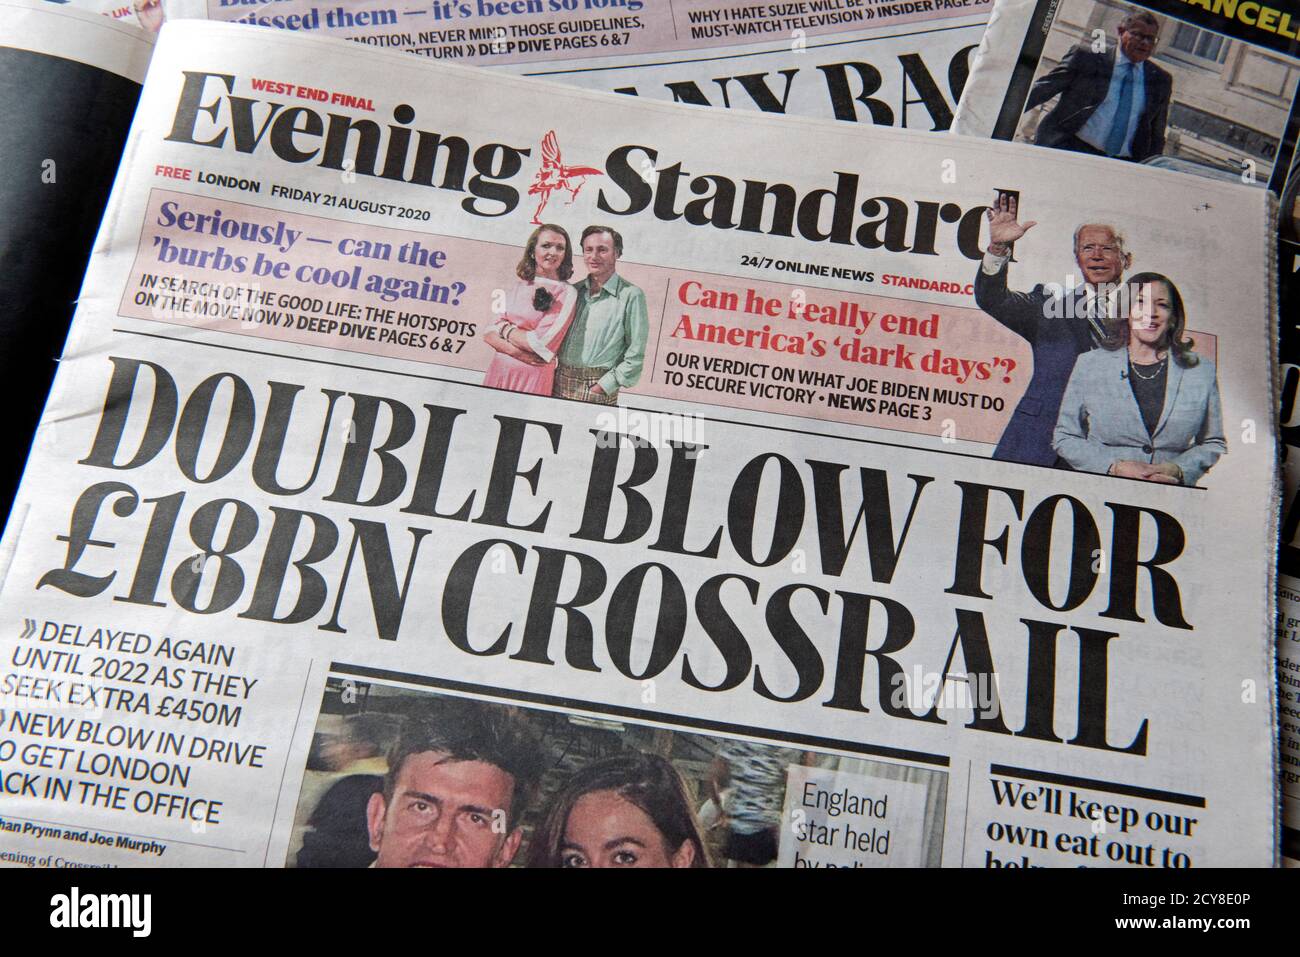 Evening Standard headline - Double Blow for £18BN Crossrail - dated 21st August 2020 Stock Photo